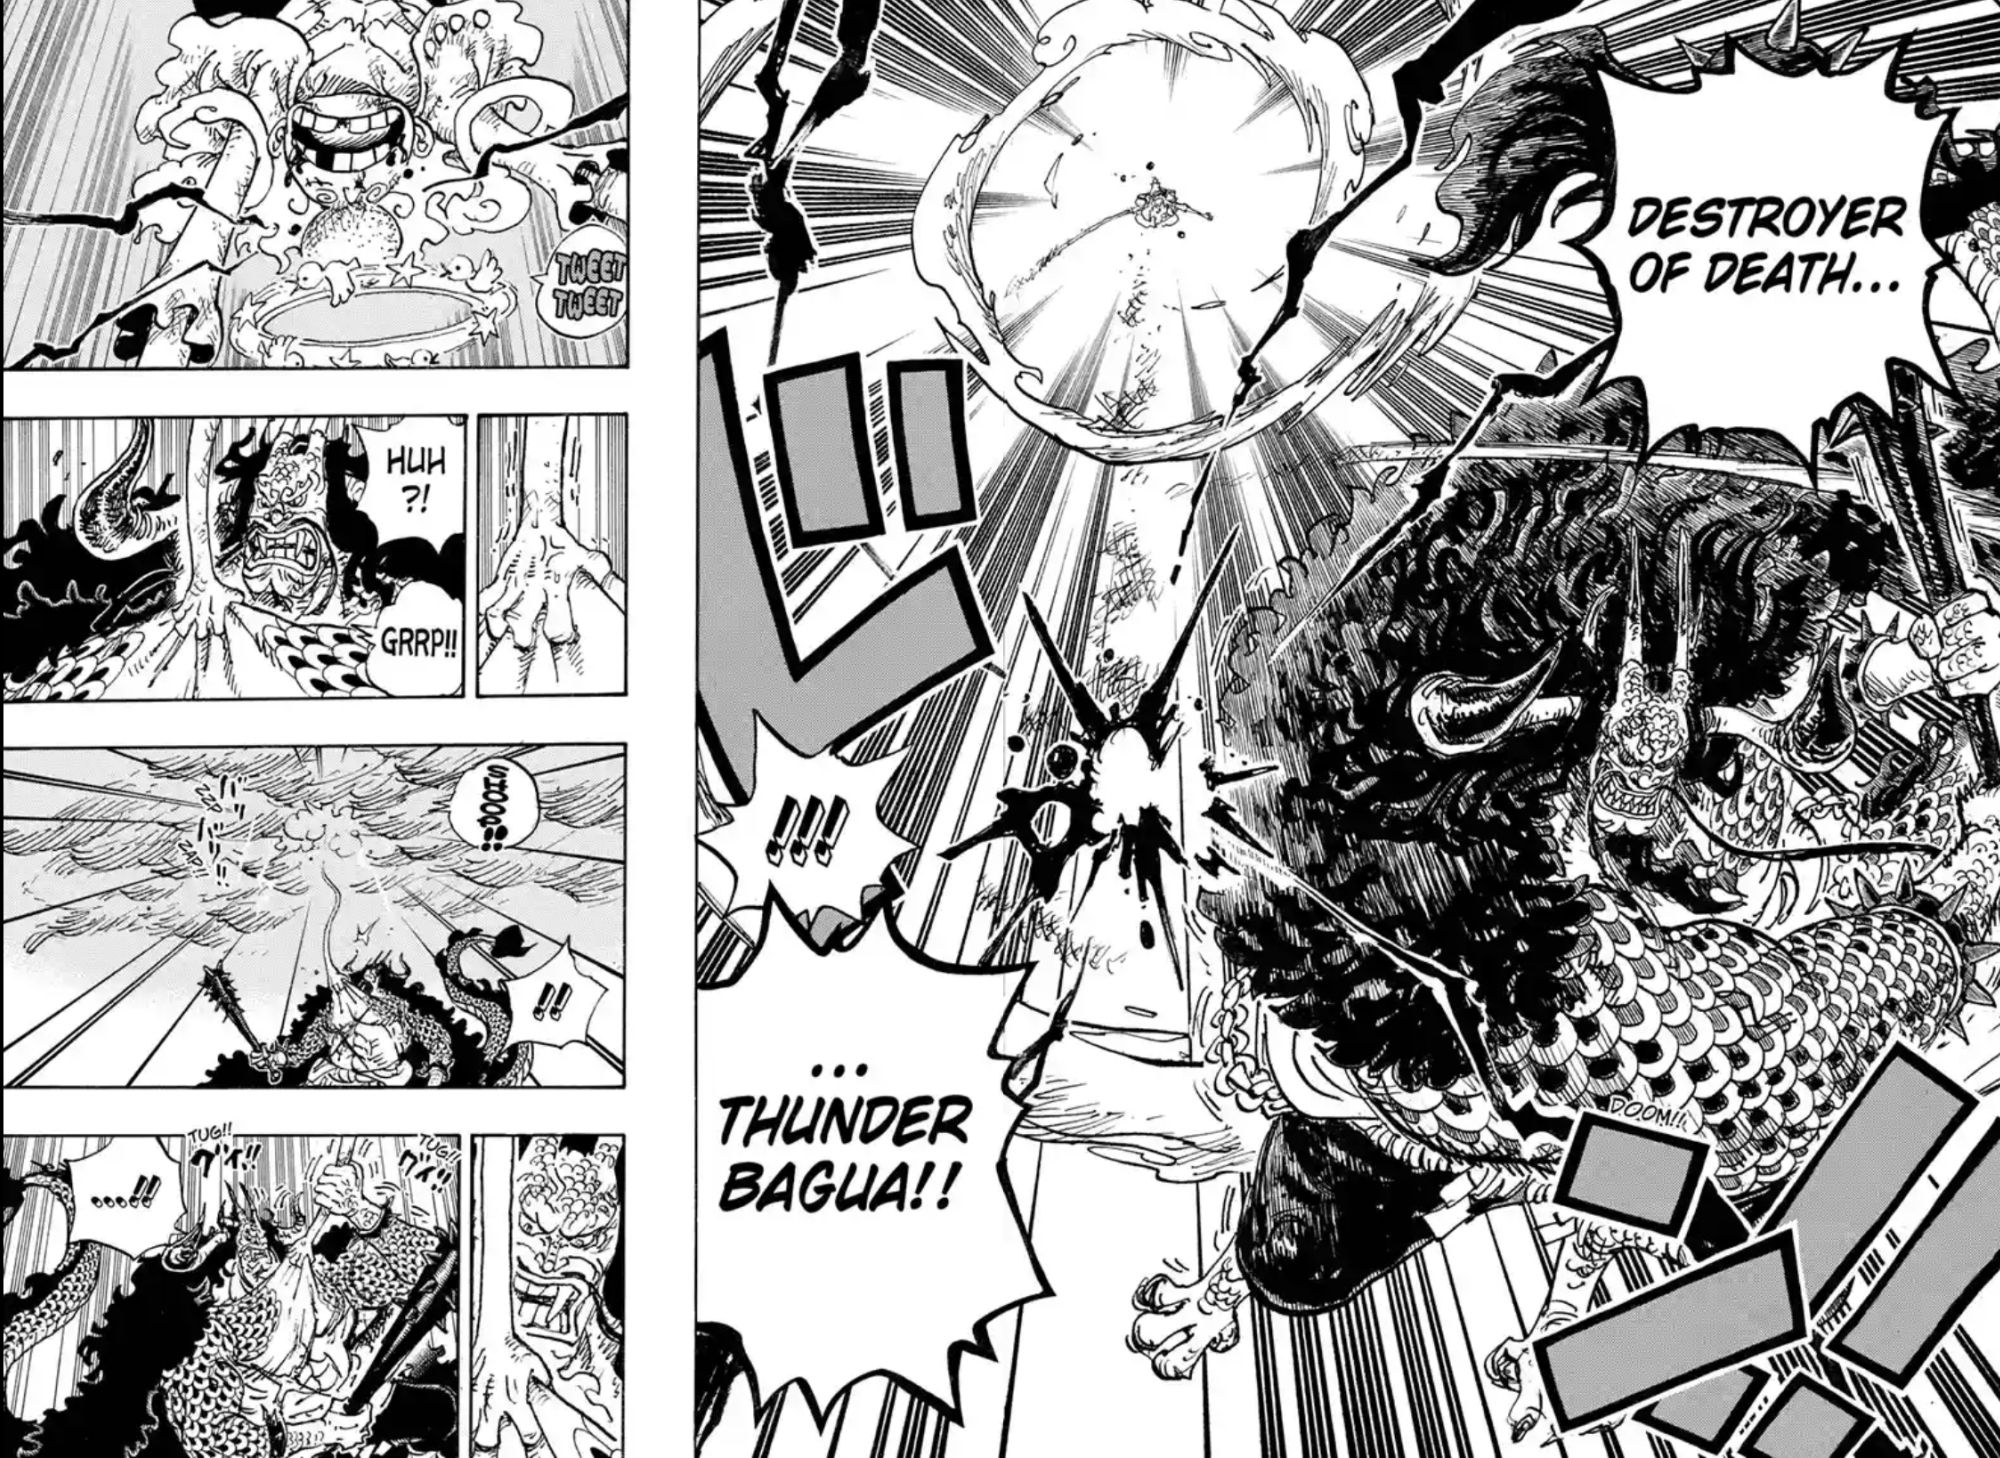 One-Piece-Chapter-1047-Luffy-Kaido-Destroyer-of-Death-Thunder-Bagua